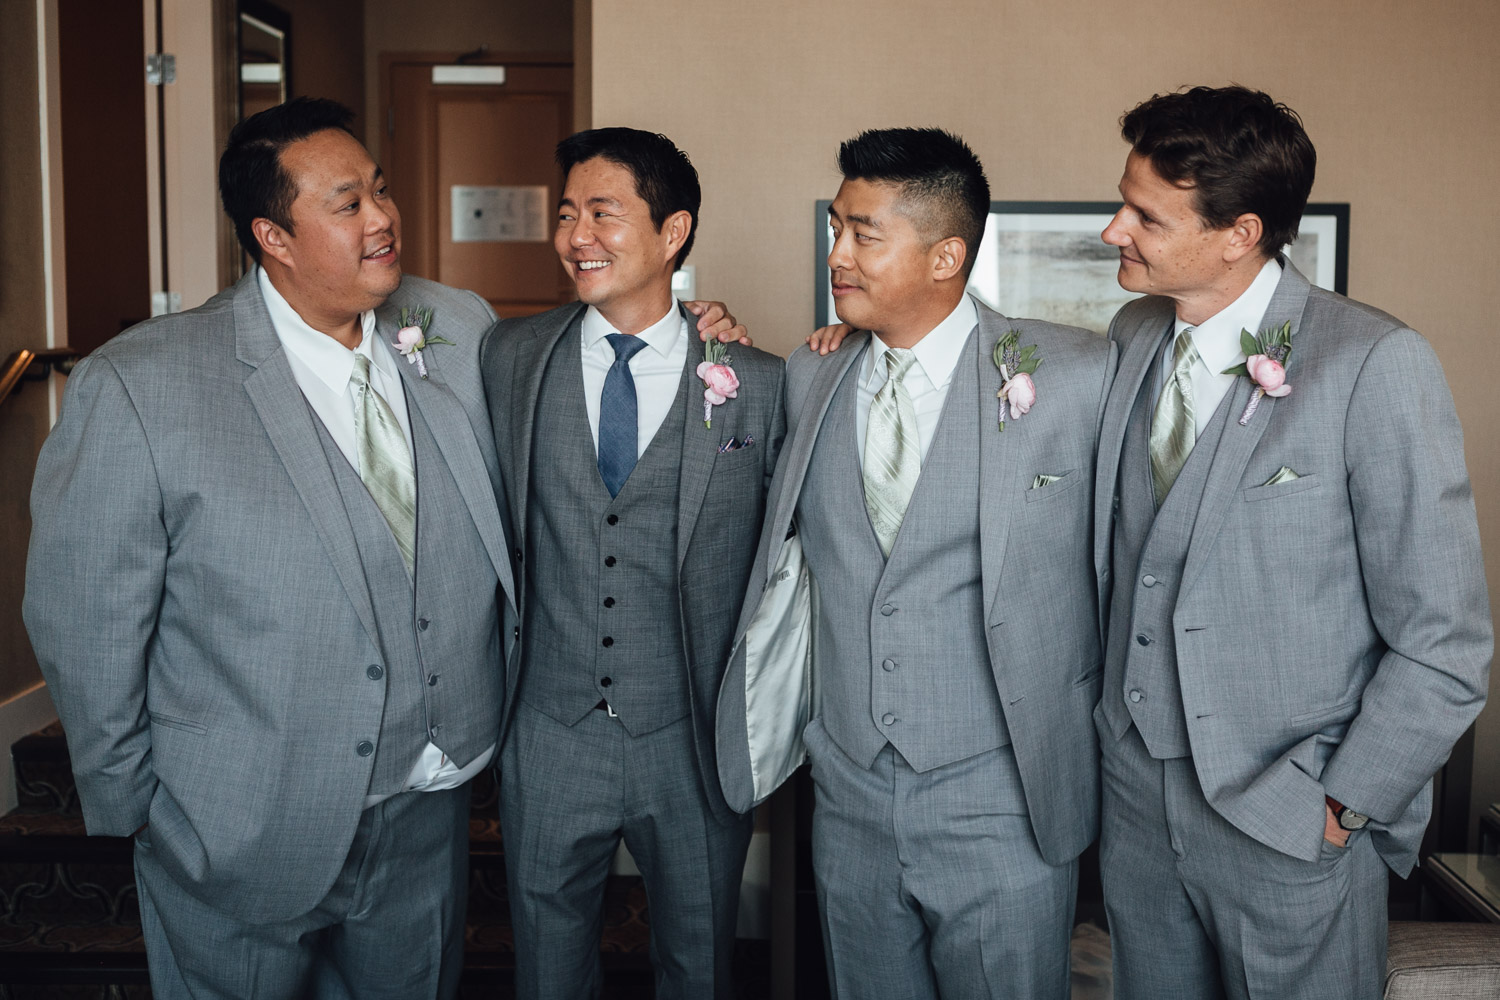 groomsmen and groom candid at river rock casino in richmond bc wedding photography